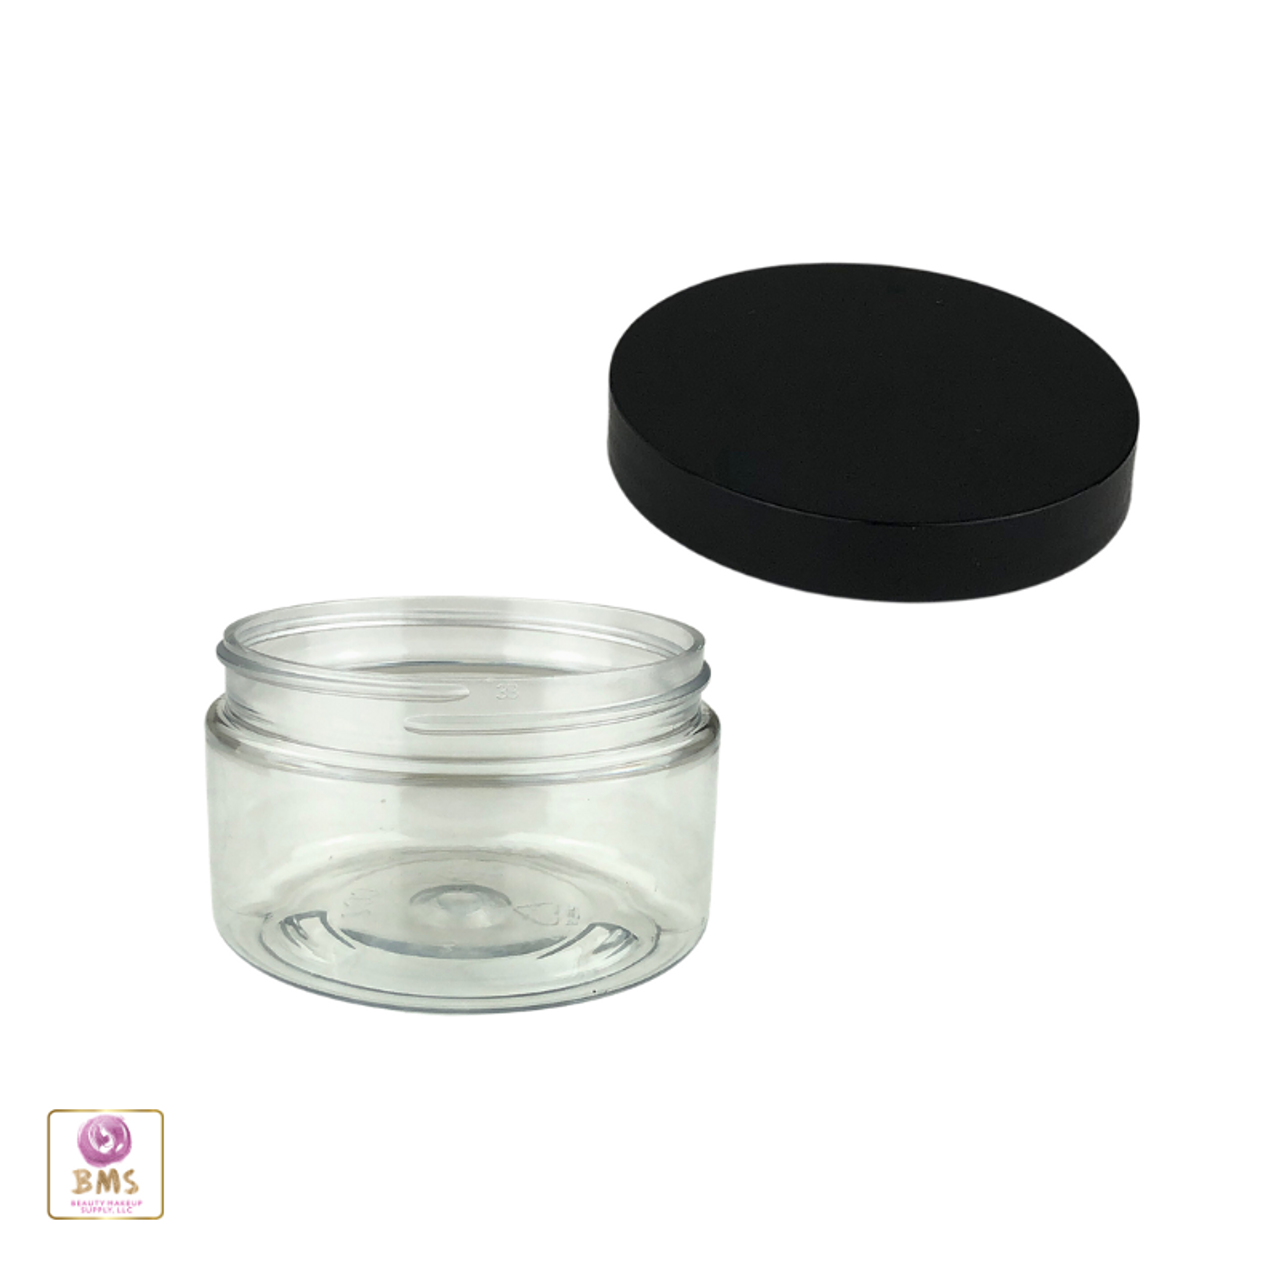 https://cdn11.bigcommerce.com/s-qd7k5gxi/images/stencil/1280x1280/products/579/6013/Copy_of_4_oz_heavy_wall_clear_jar_9372_beauty_makeup_supply__99631.1620095955.png?c=2?imbypass=on